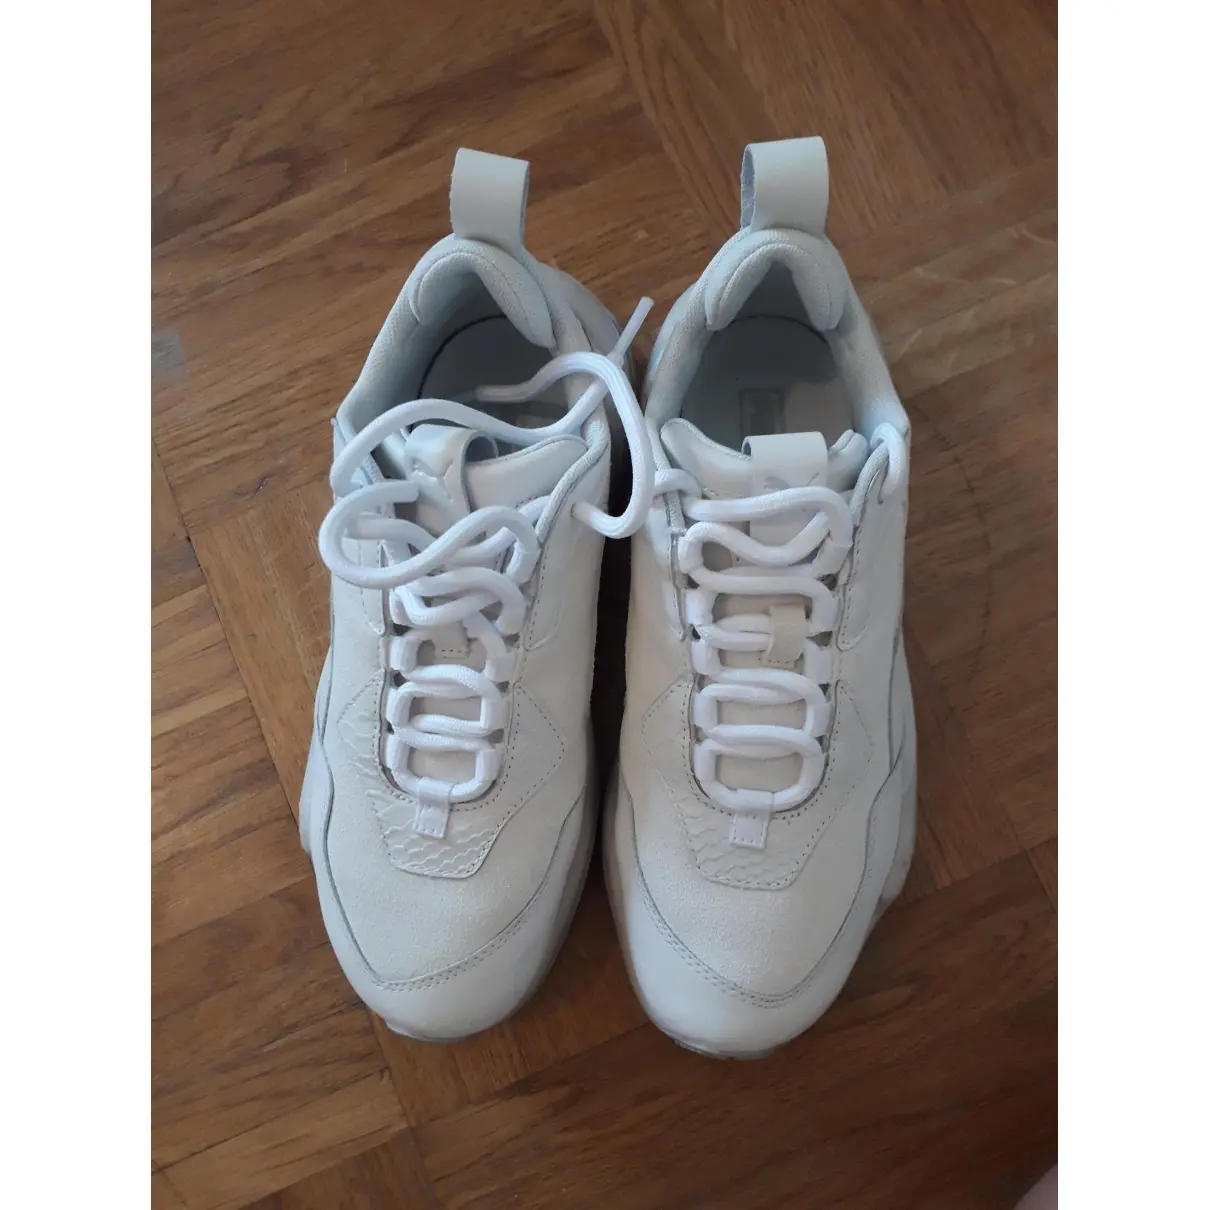 Puma Leather trainers for sale